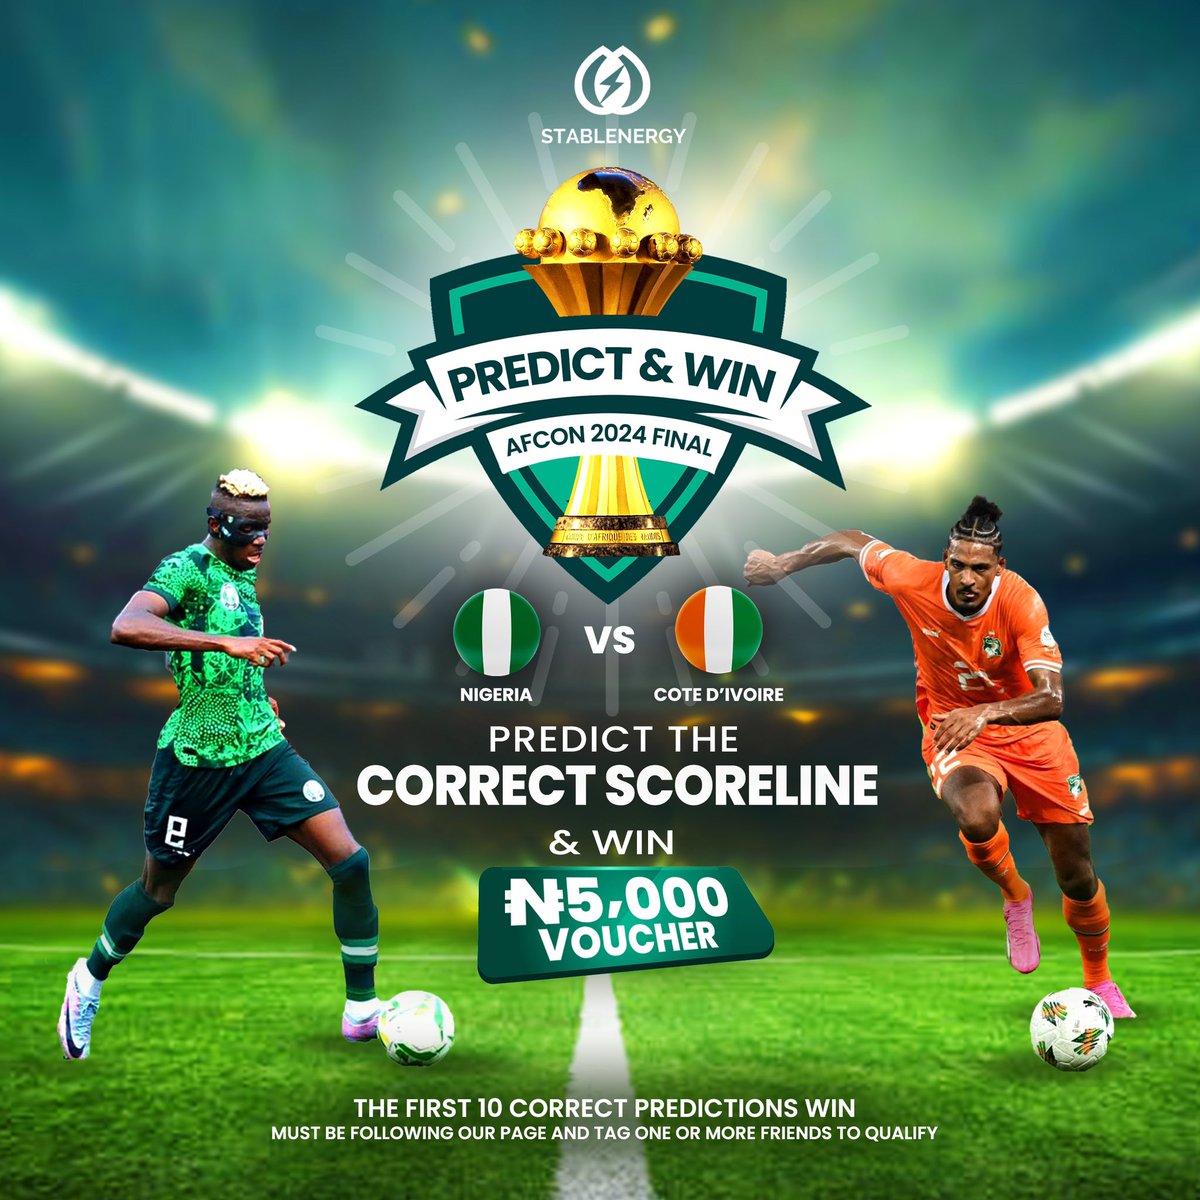 THE FINAL BATTLE ⚽️ Who will take home the trophy? 🏆 •Predict the correct scoreline to win 5k voucher ✨ •Must be following our page,tag one or more friends to qualify #nigeriavsivorycoast #stablenergy #invertertechnology #renewablenergy #afcon2024 #afcon2023